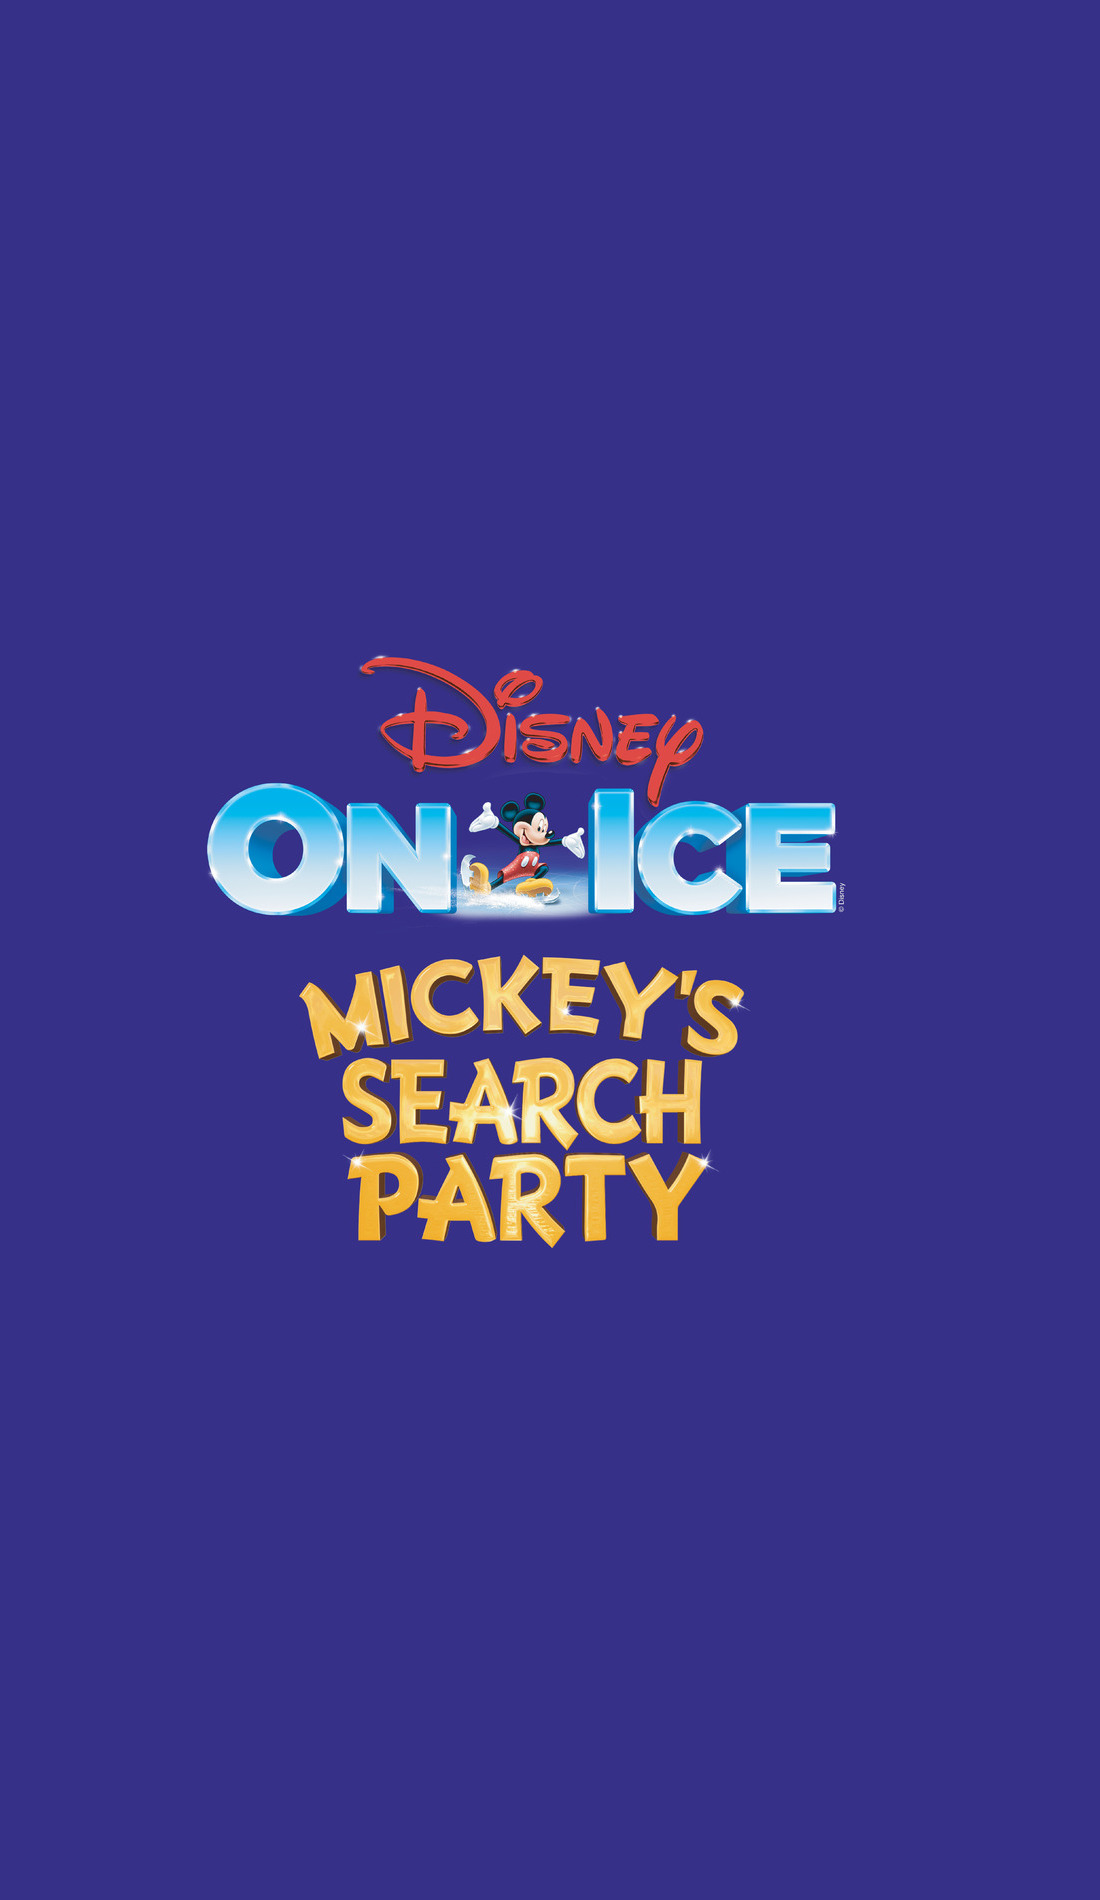 A Disney On Ice: Mickey's Search Party live event